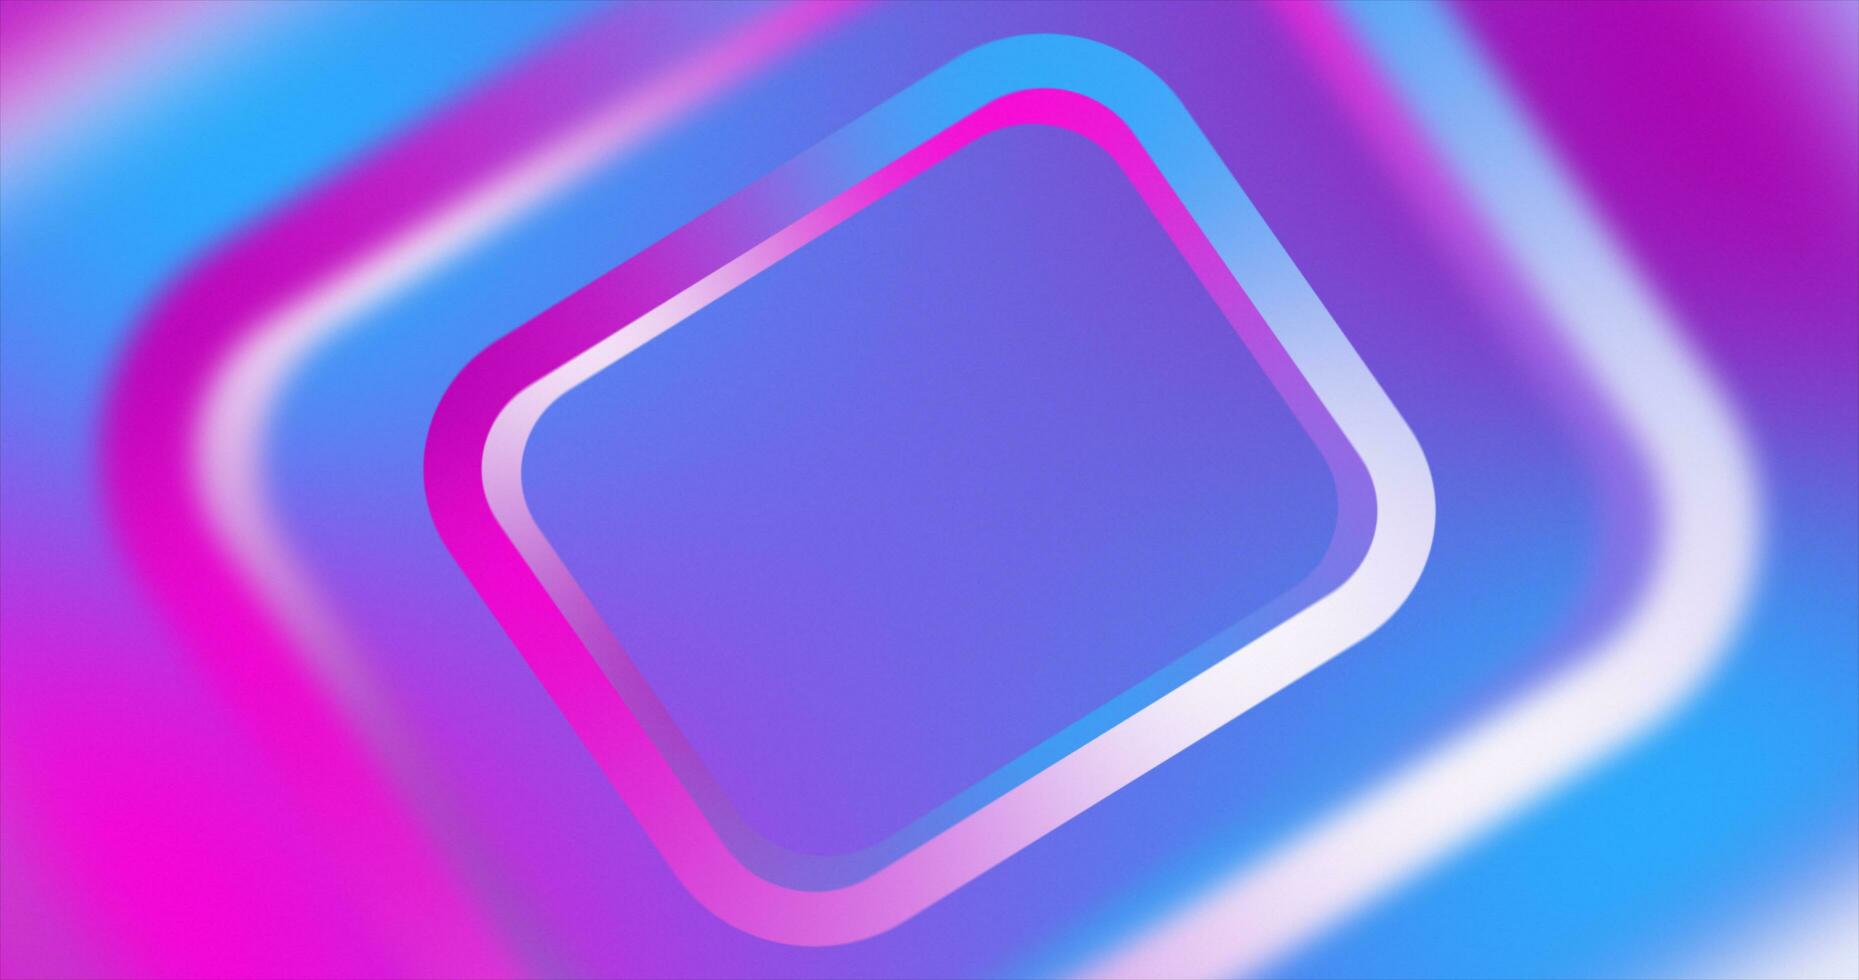 Abstract purple and pink gradient rectangles bright juicy blurred abstract loop background photo